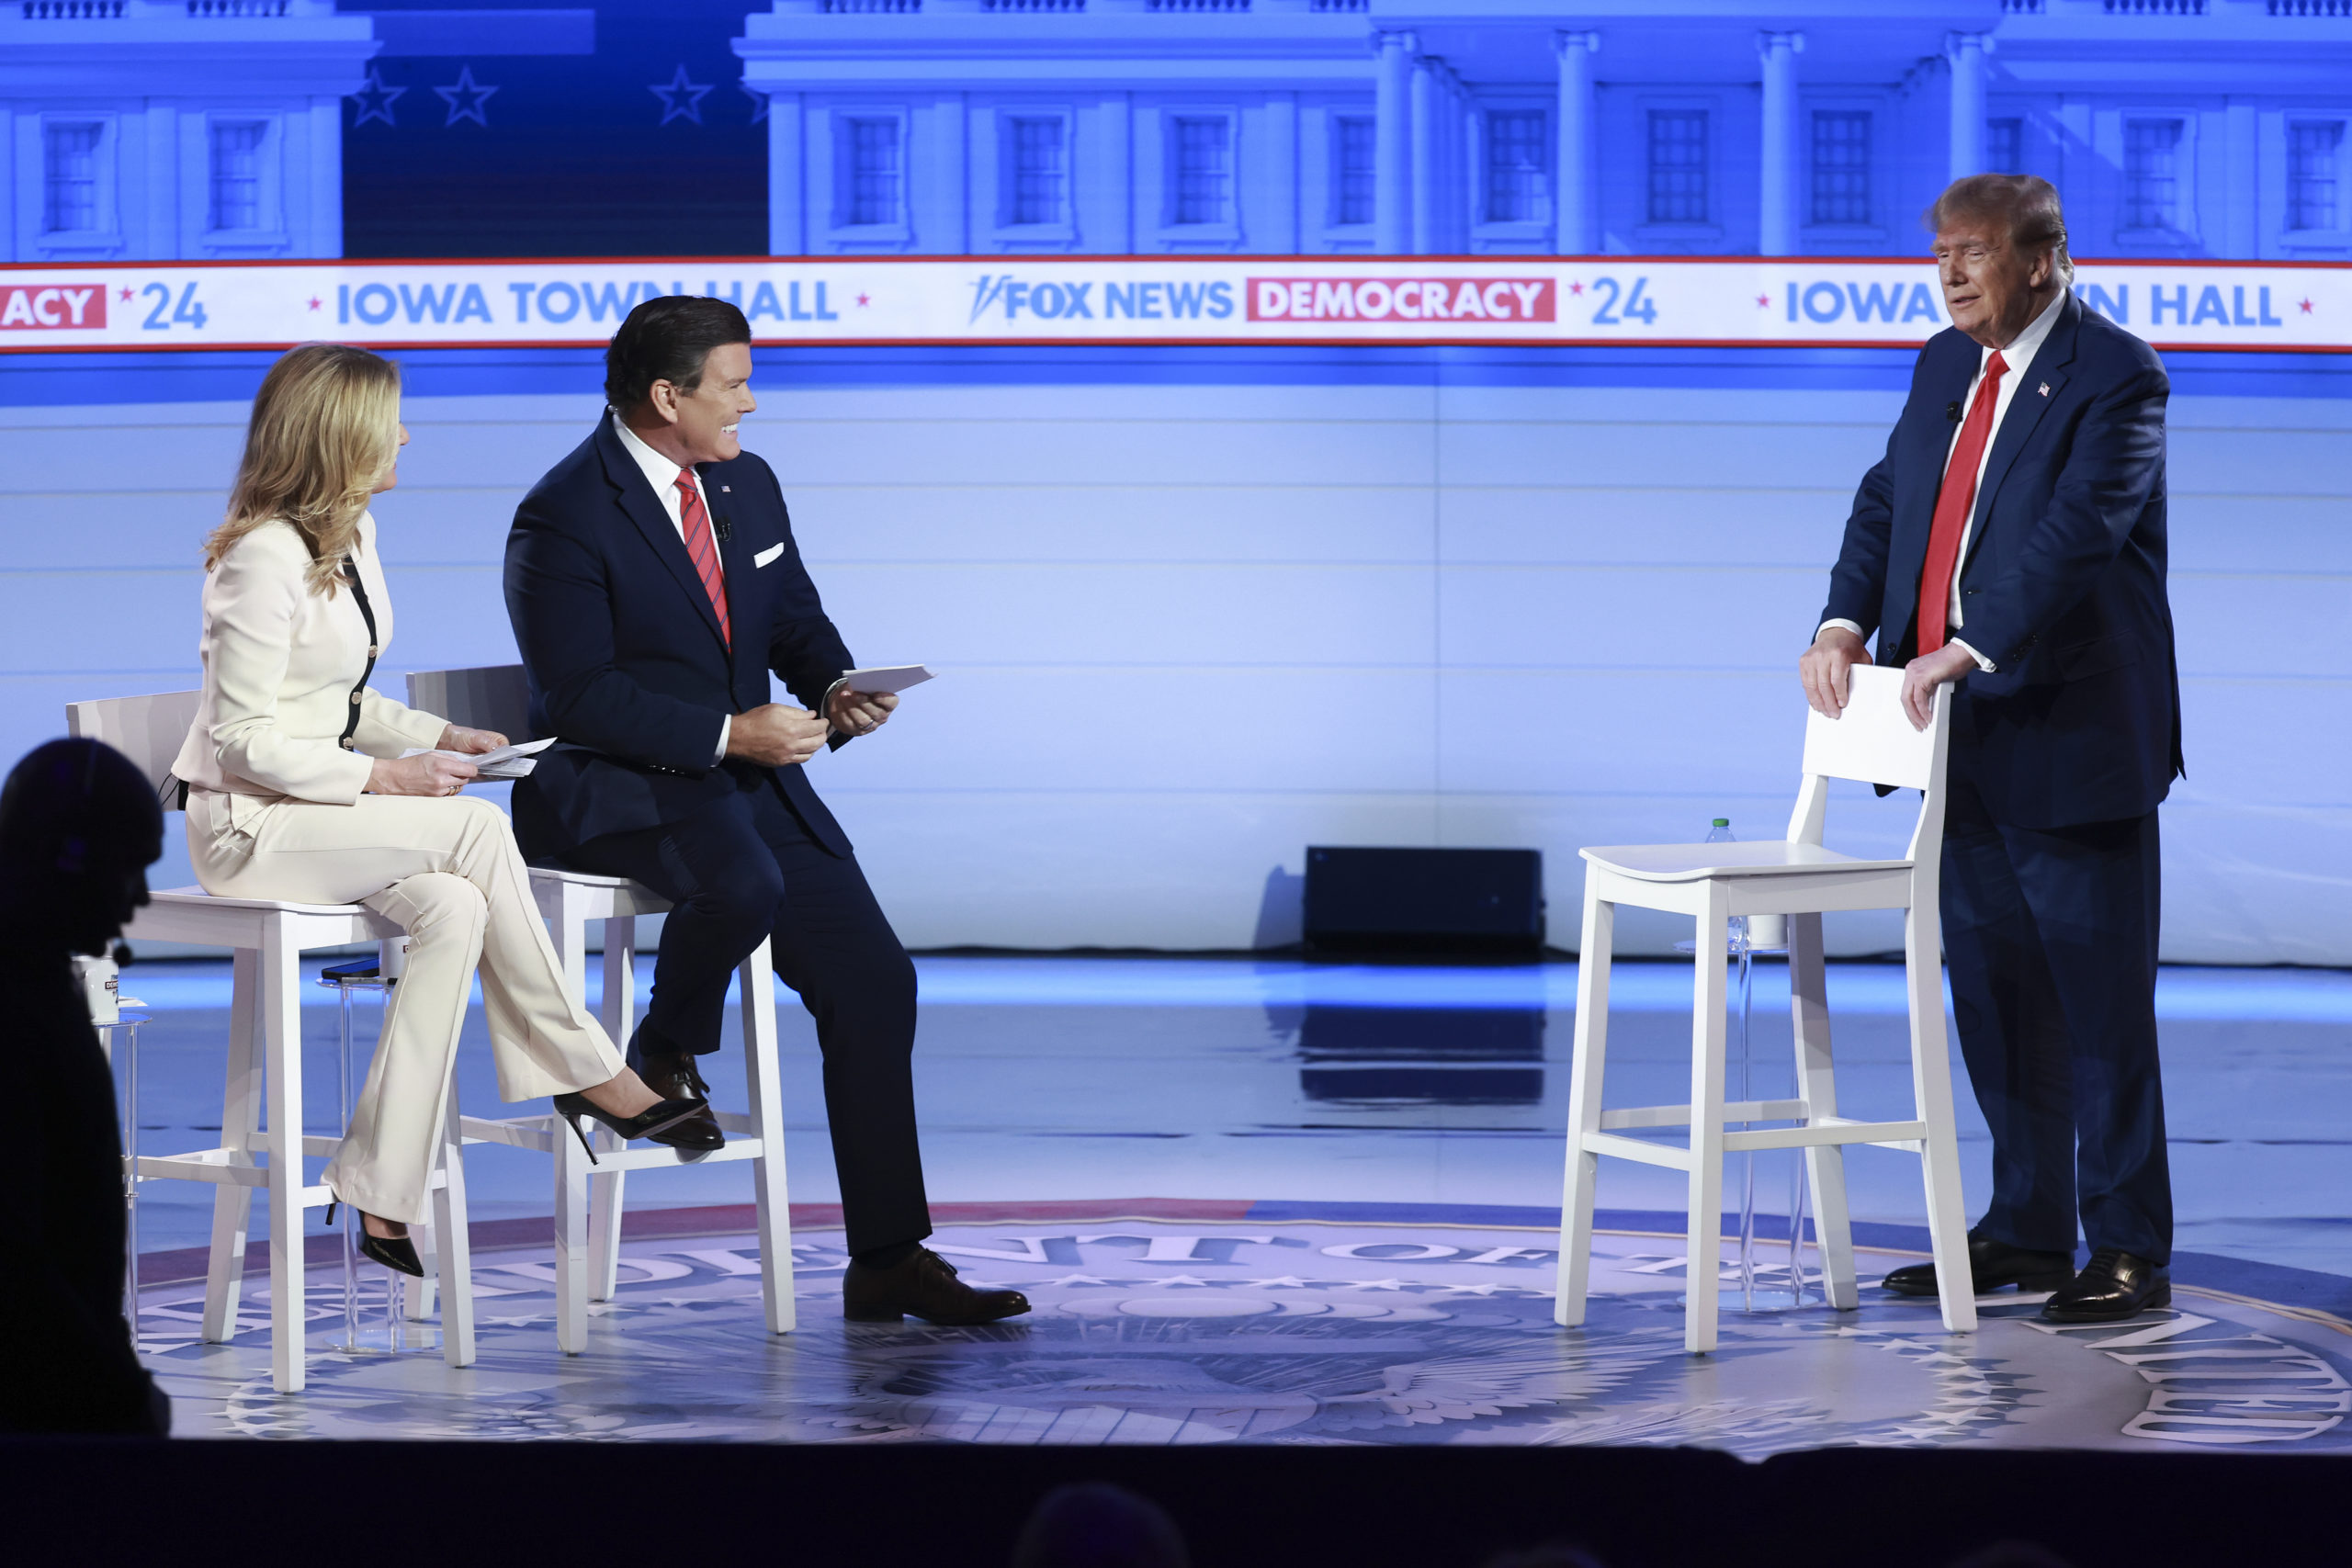 Moderators Martha MacCallum and Bret Baier host a Fox News Town Hall with Republican presidential candidate former President Donald Trump on January 10, 2024 in Des Moines, Iowa. Trump declined to participate in a debate featuring fellow Republican presidential candidates former U.N. Ambassador Nikki Haley and Florida Governor Ron DeSantis also taking place this evening. (Photo by Joe Raedle/Getty Images)